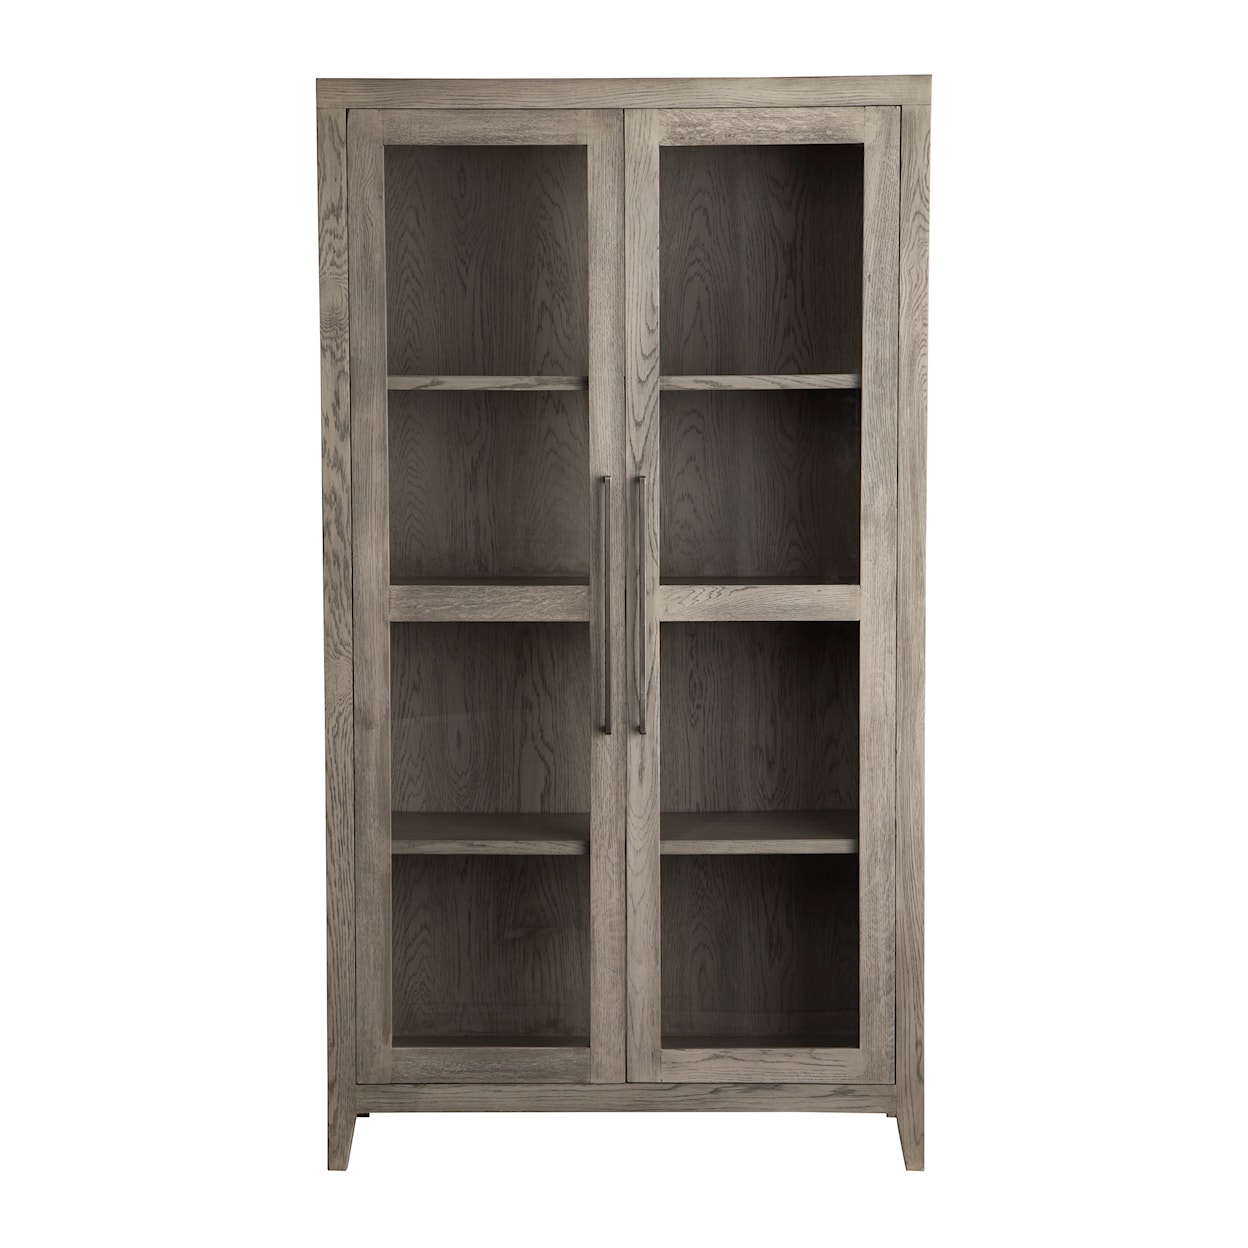 StyleLine Dalenville Accent Cabinet